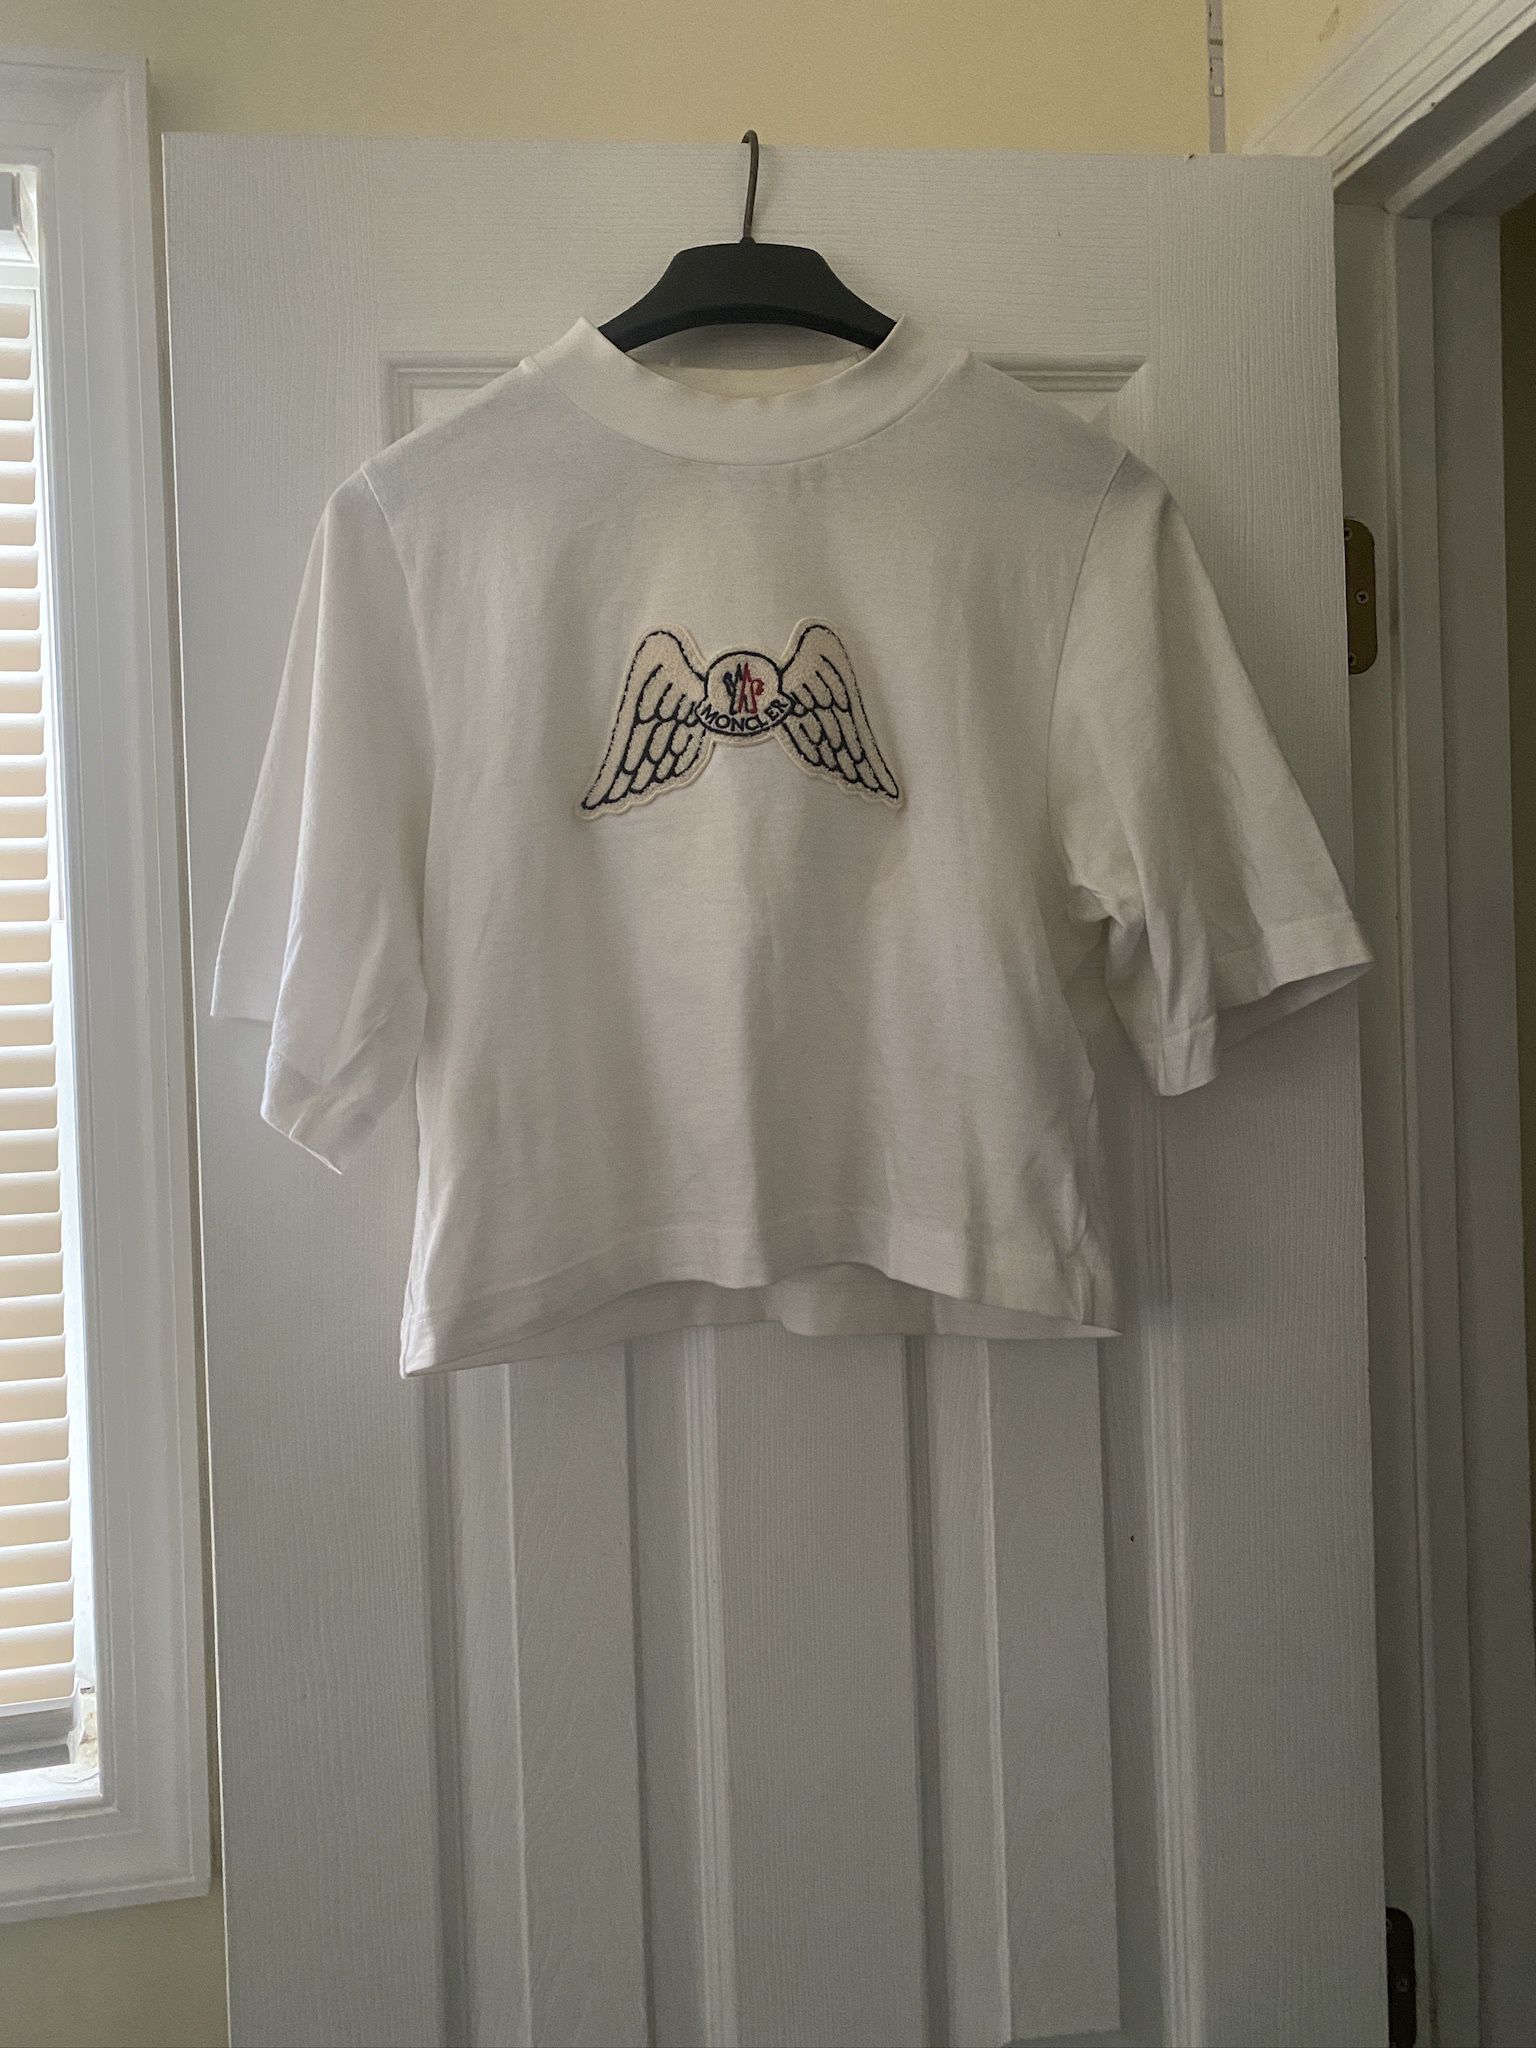 palm angels x moncler mock tee